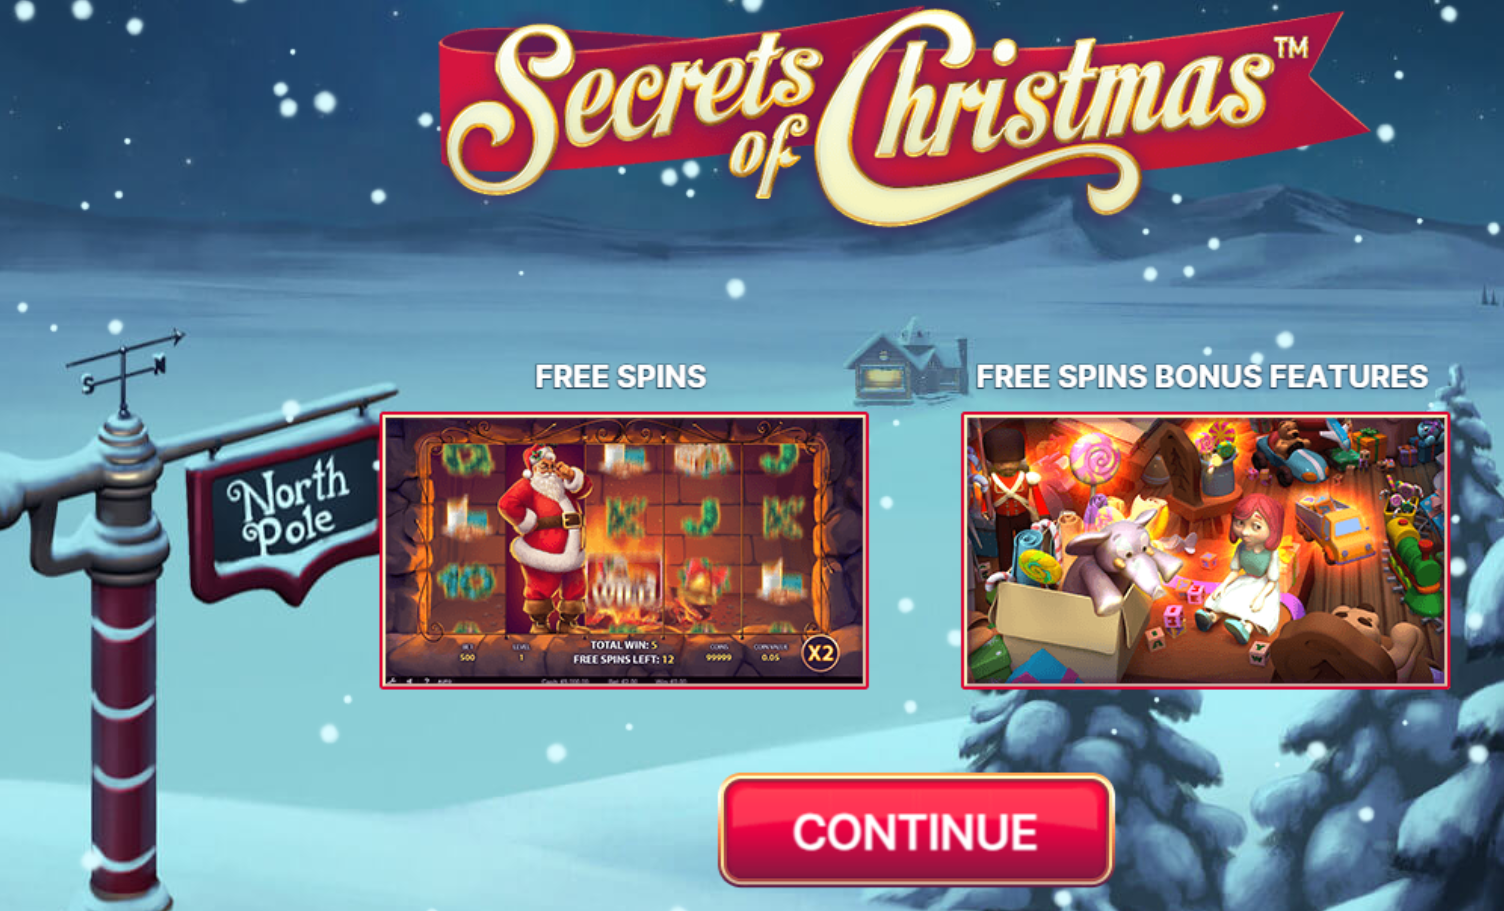 A screenshot of a video game called Secrets of Christmas, shows a north pole background with preview of the santa slot game